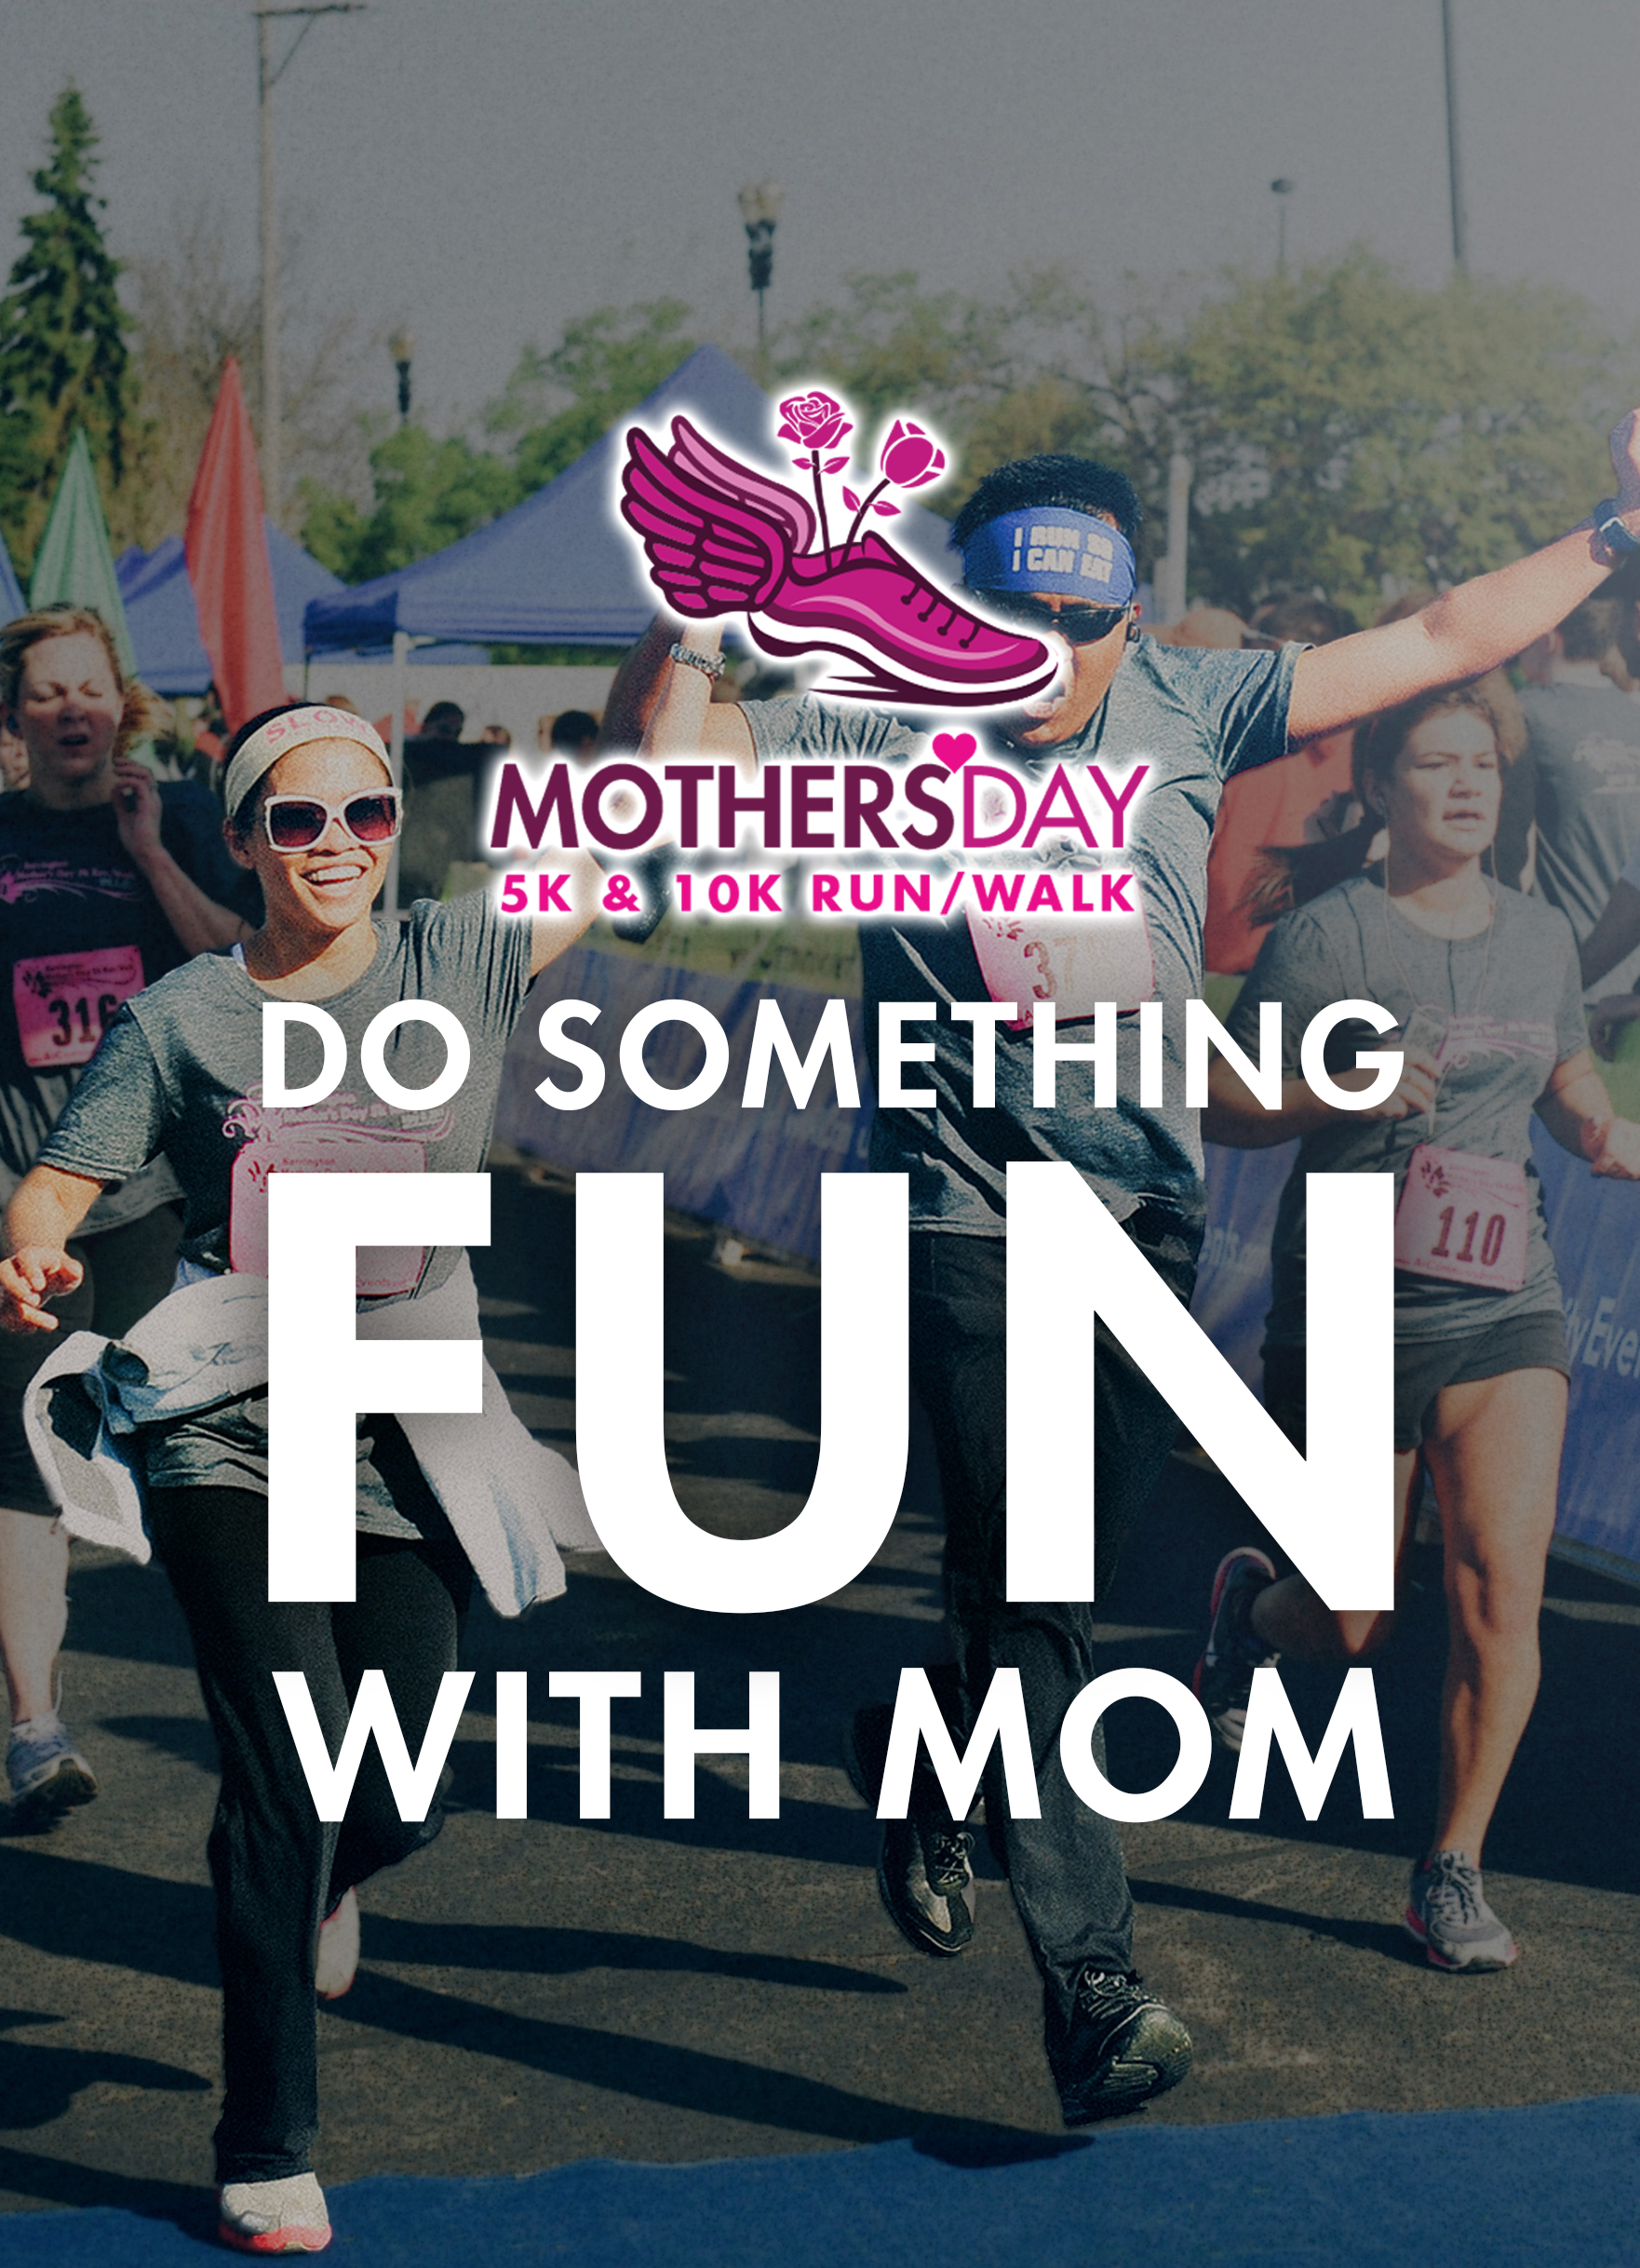 St. Louis Mother’s Day 5K & 10K